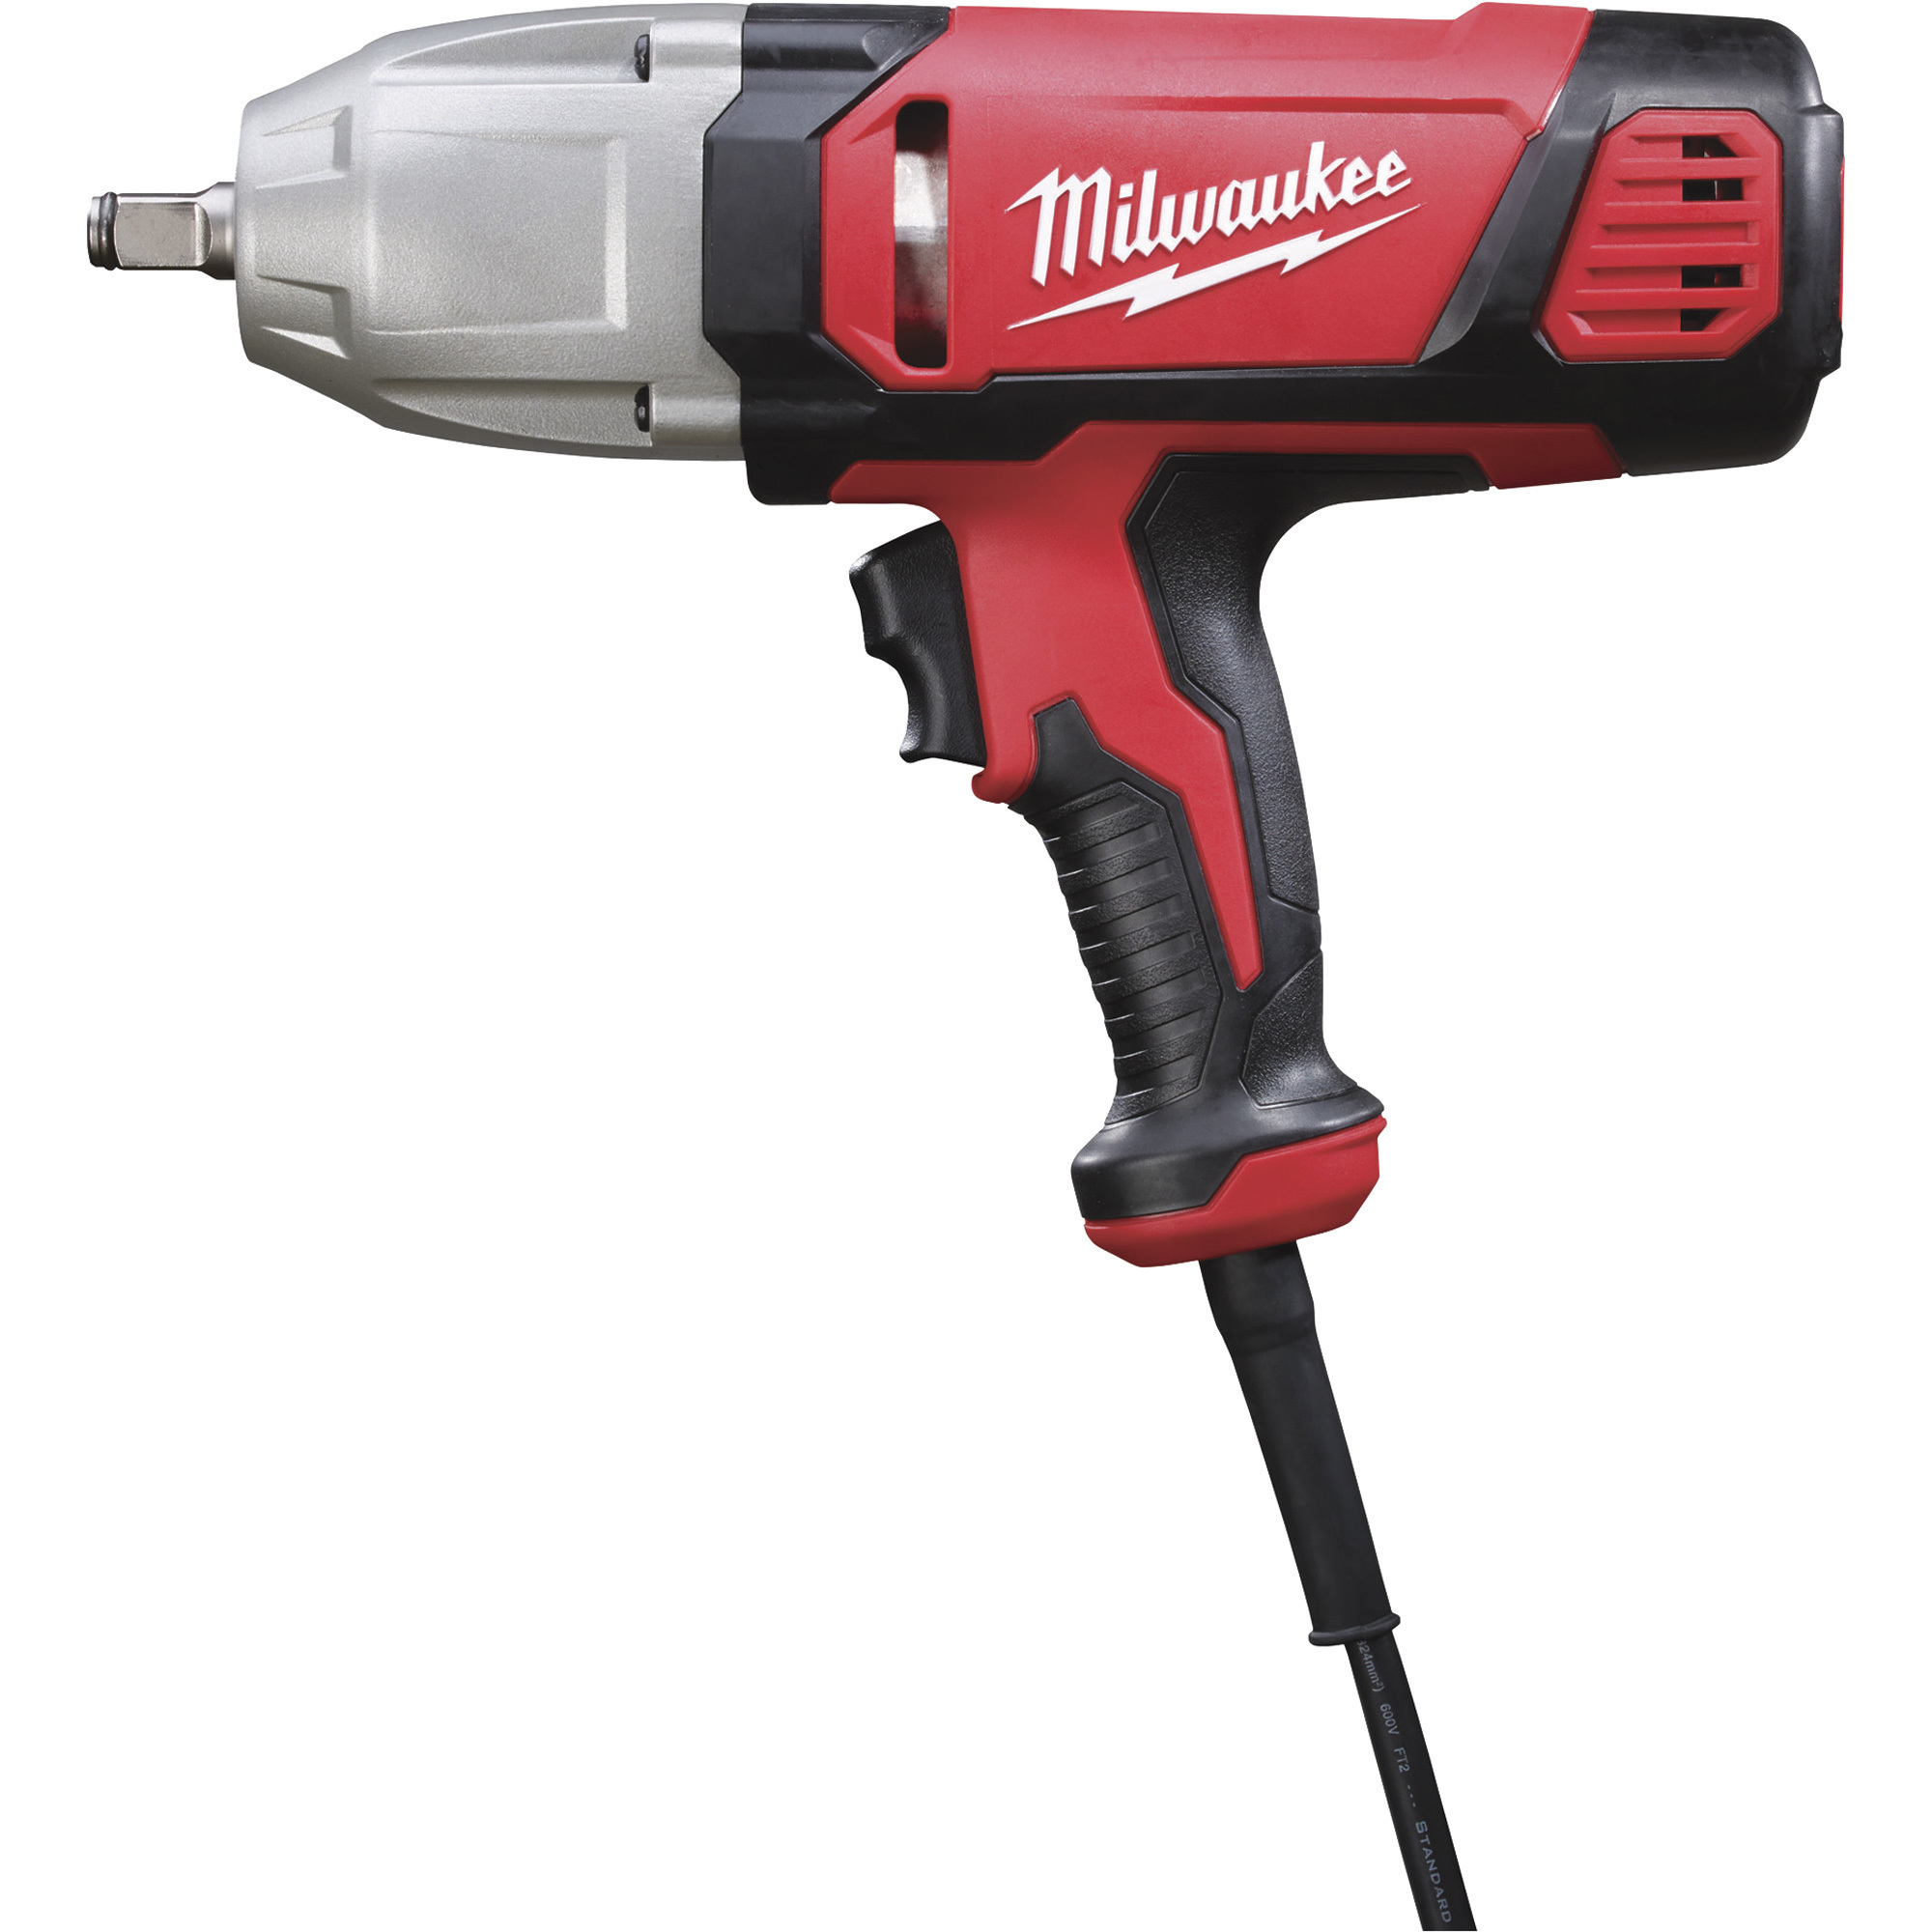 Electric Corded Impact Wrench with Friction Ring and Rocker Switch — 1/2Inch Drive, 300 Ft.-Lbs. Torque, Model - Milwaukee 9071-20